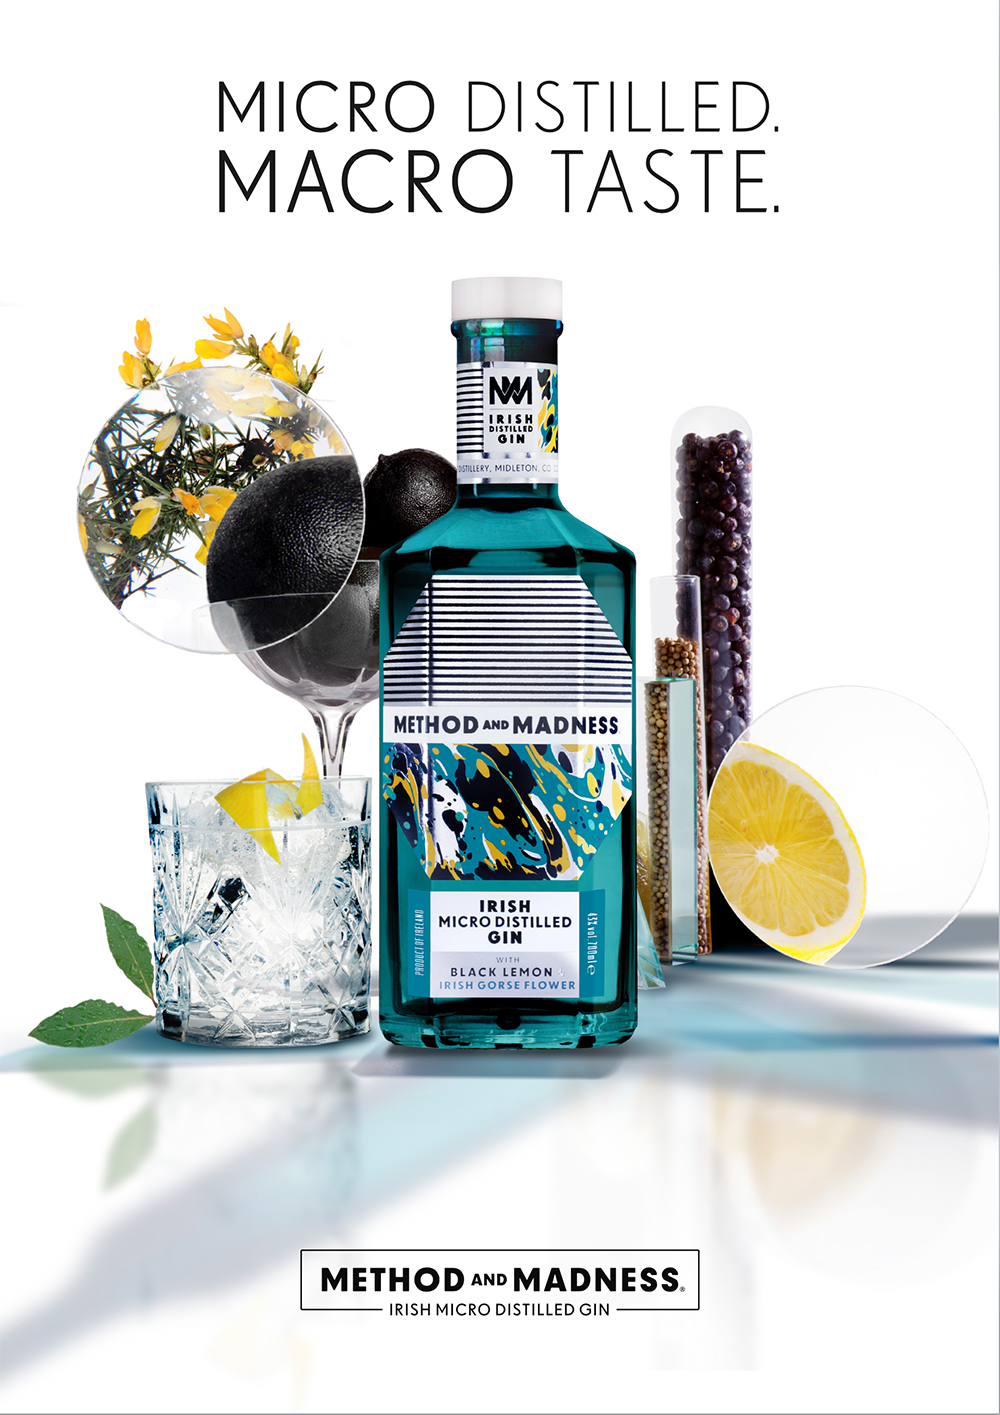 Client: Pernod Ricard: METHOD AND MADNESS